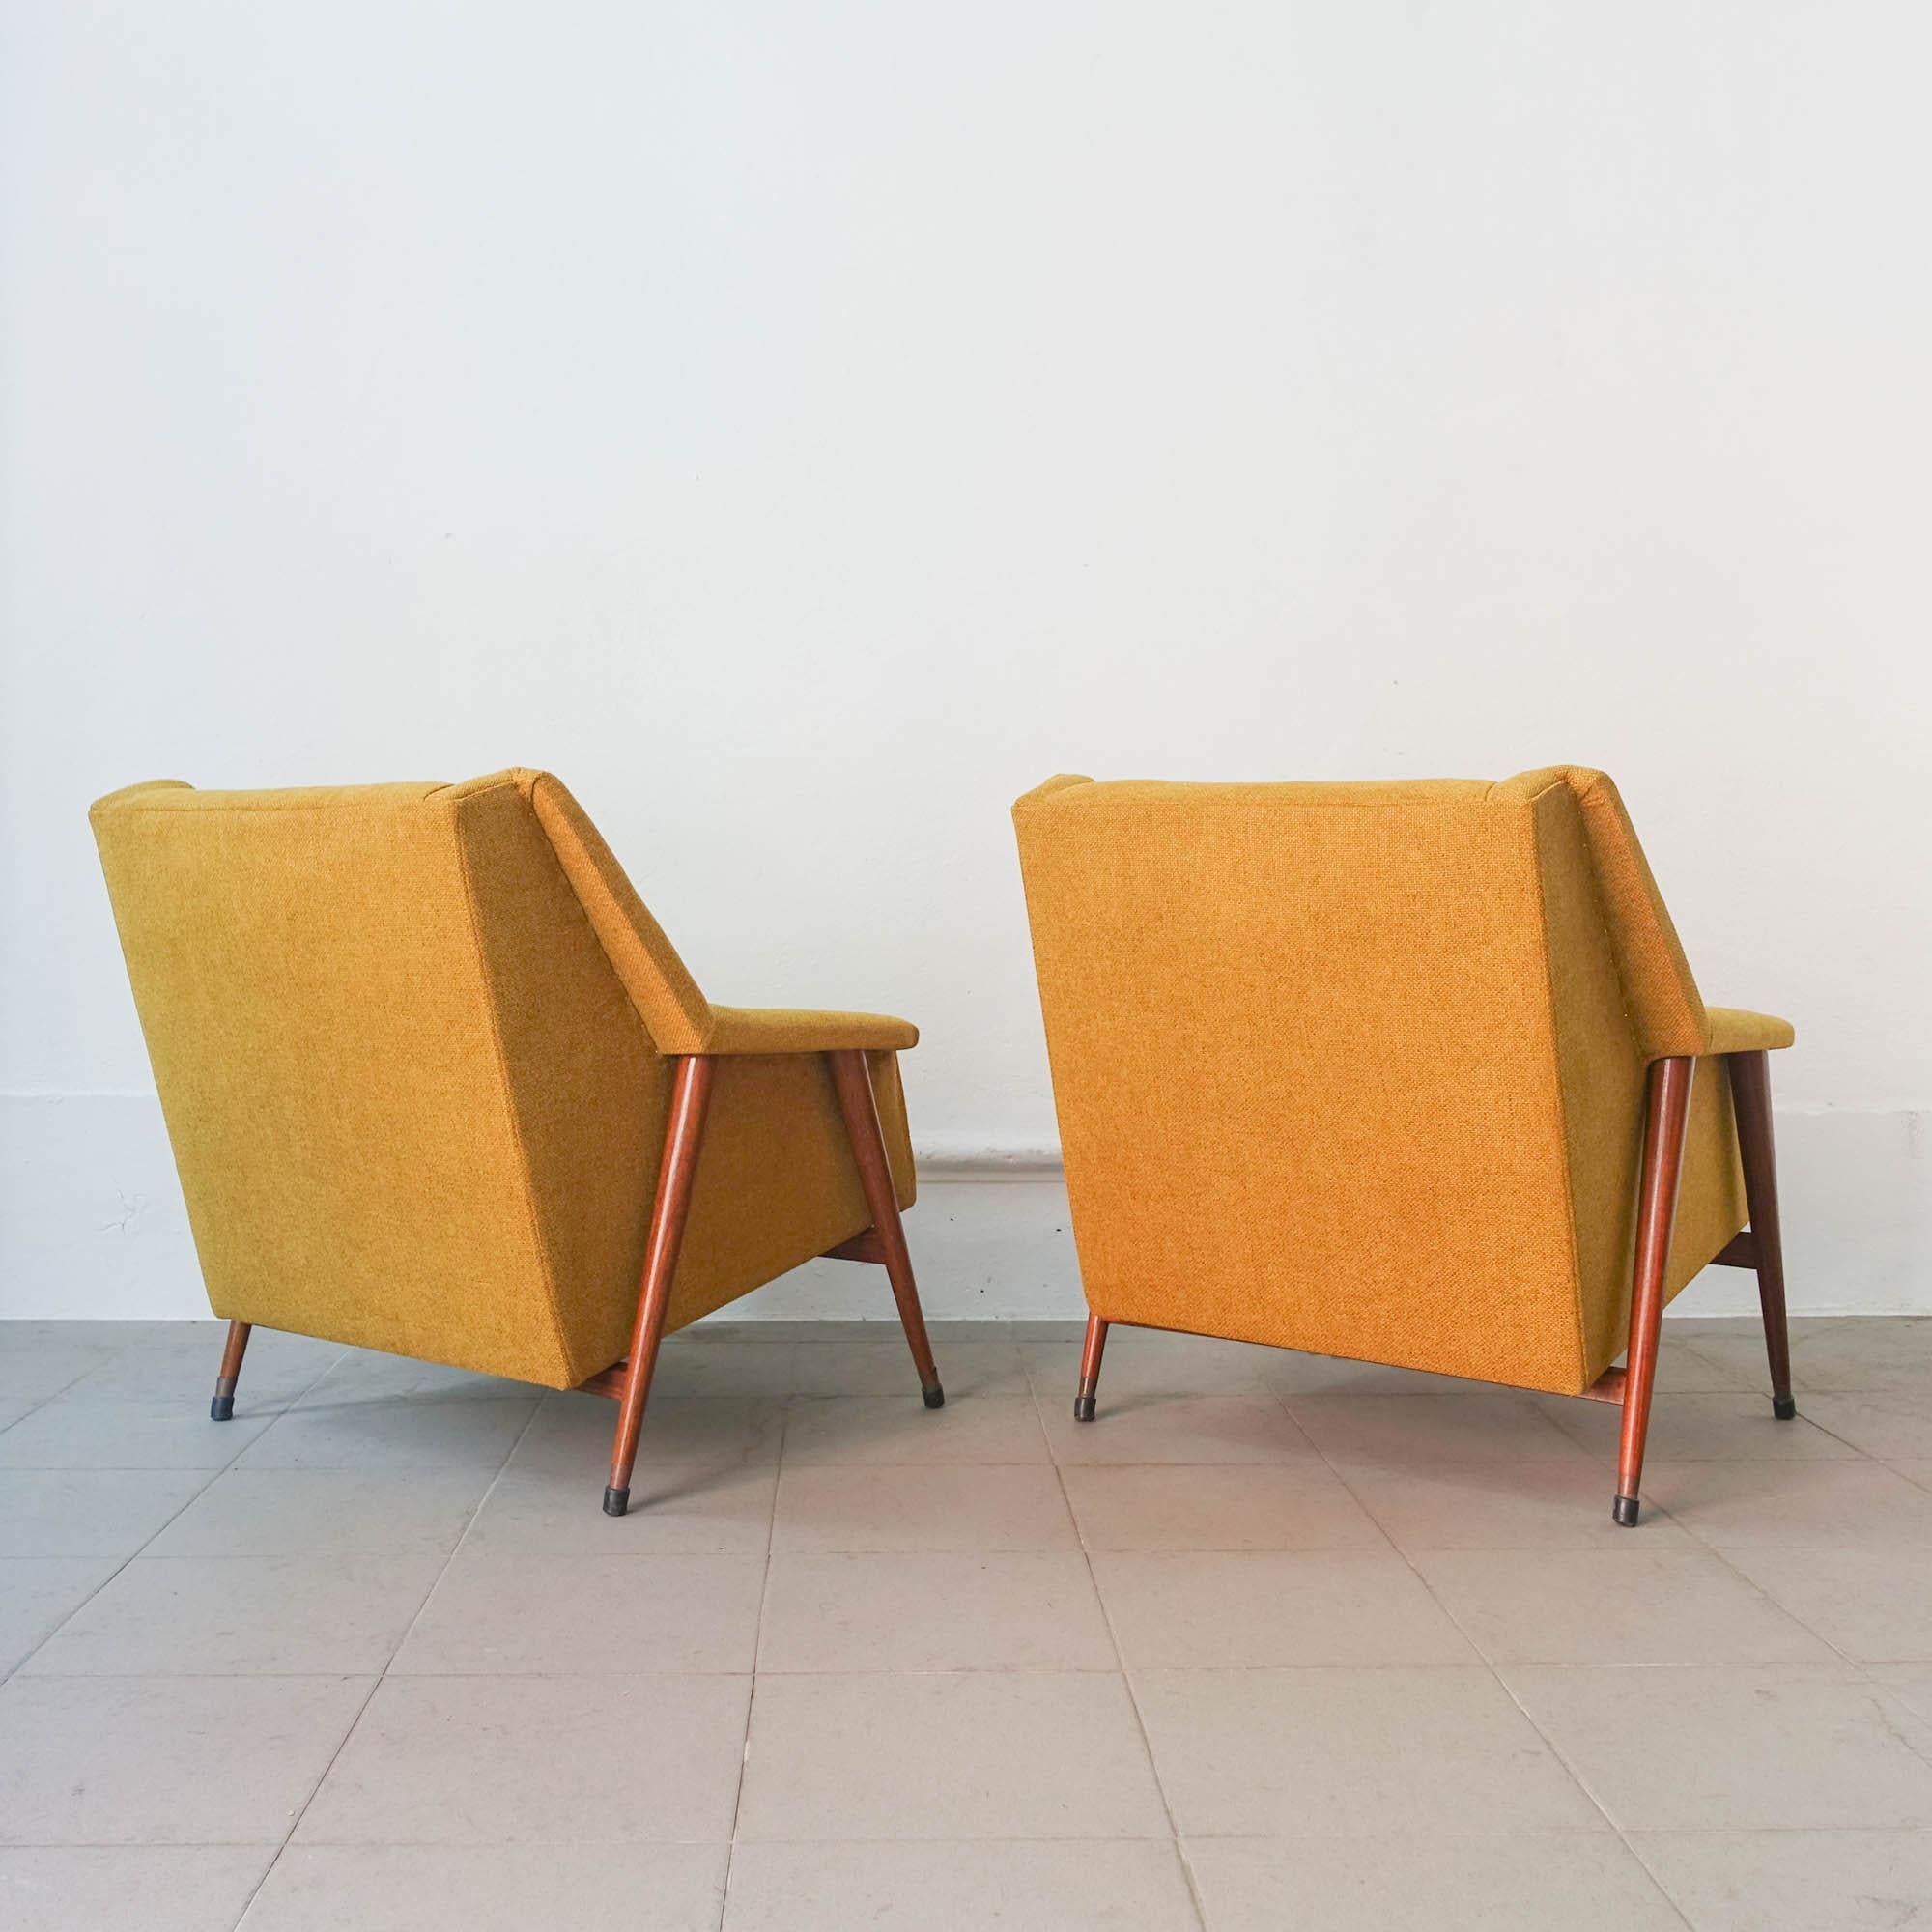 Portuguese Pair of Easy Chairs, by José Espinho for Olaio, 1959 For Sale